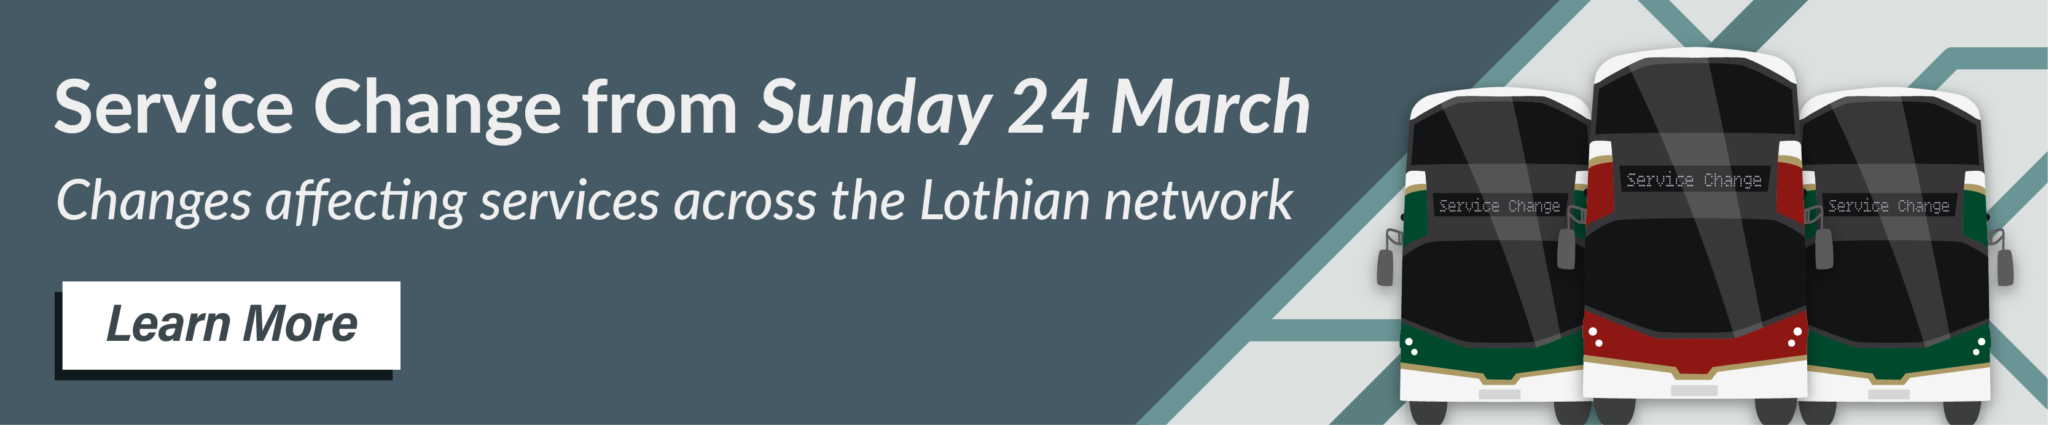 Service Change from Sunday 24 March. Changes affecting services across the Lothian network. Learn more.